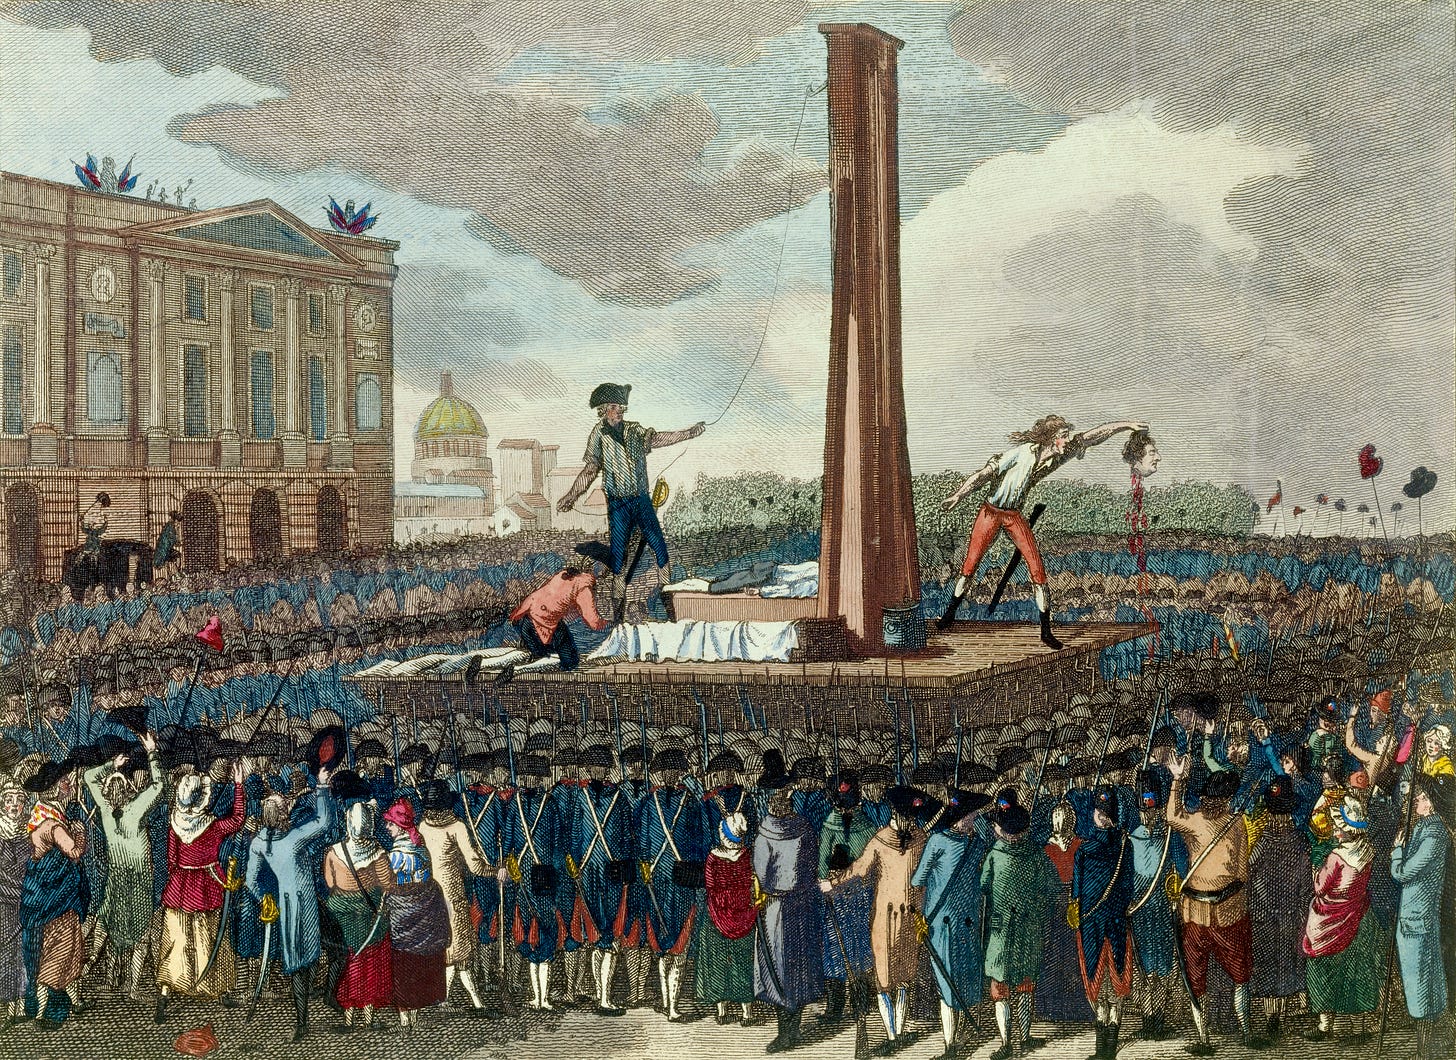 An engraving depicting the execution of Louis XVI. (Photo by Christophel Fine Art/Universal Images Group via Getty Images.)